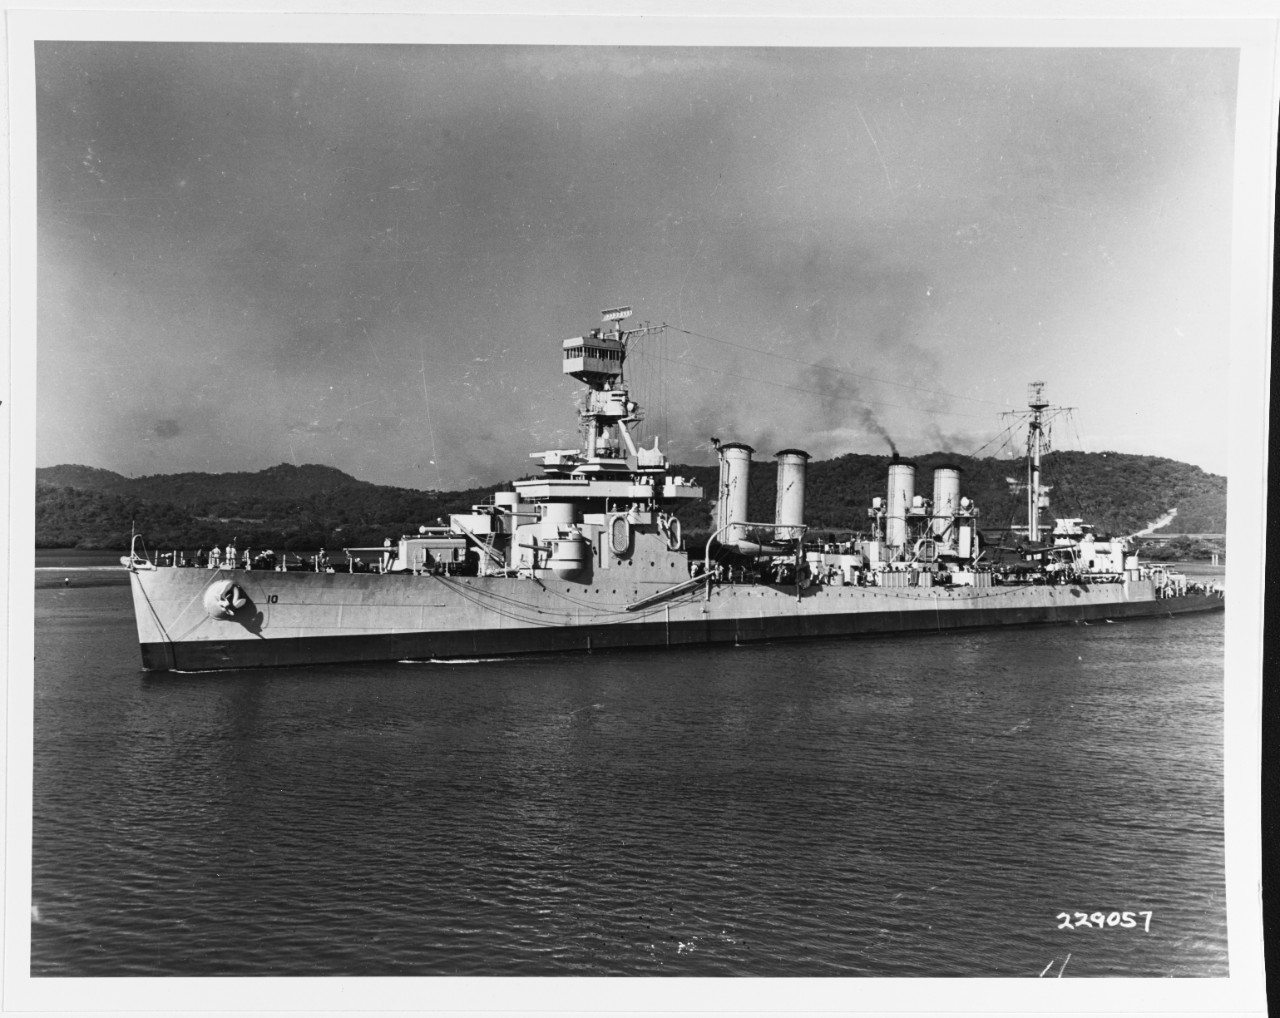 USS CONCORD (CL-10) leaves Pier 18 at Balboa, Canal Zone, for a South Pacific destination, January 6, 1943